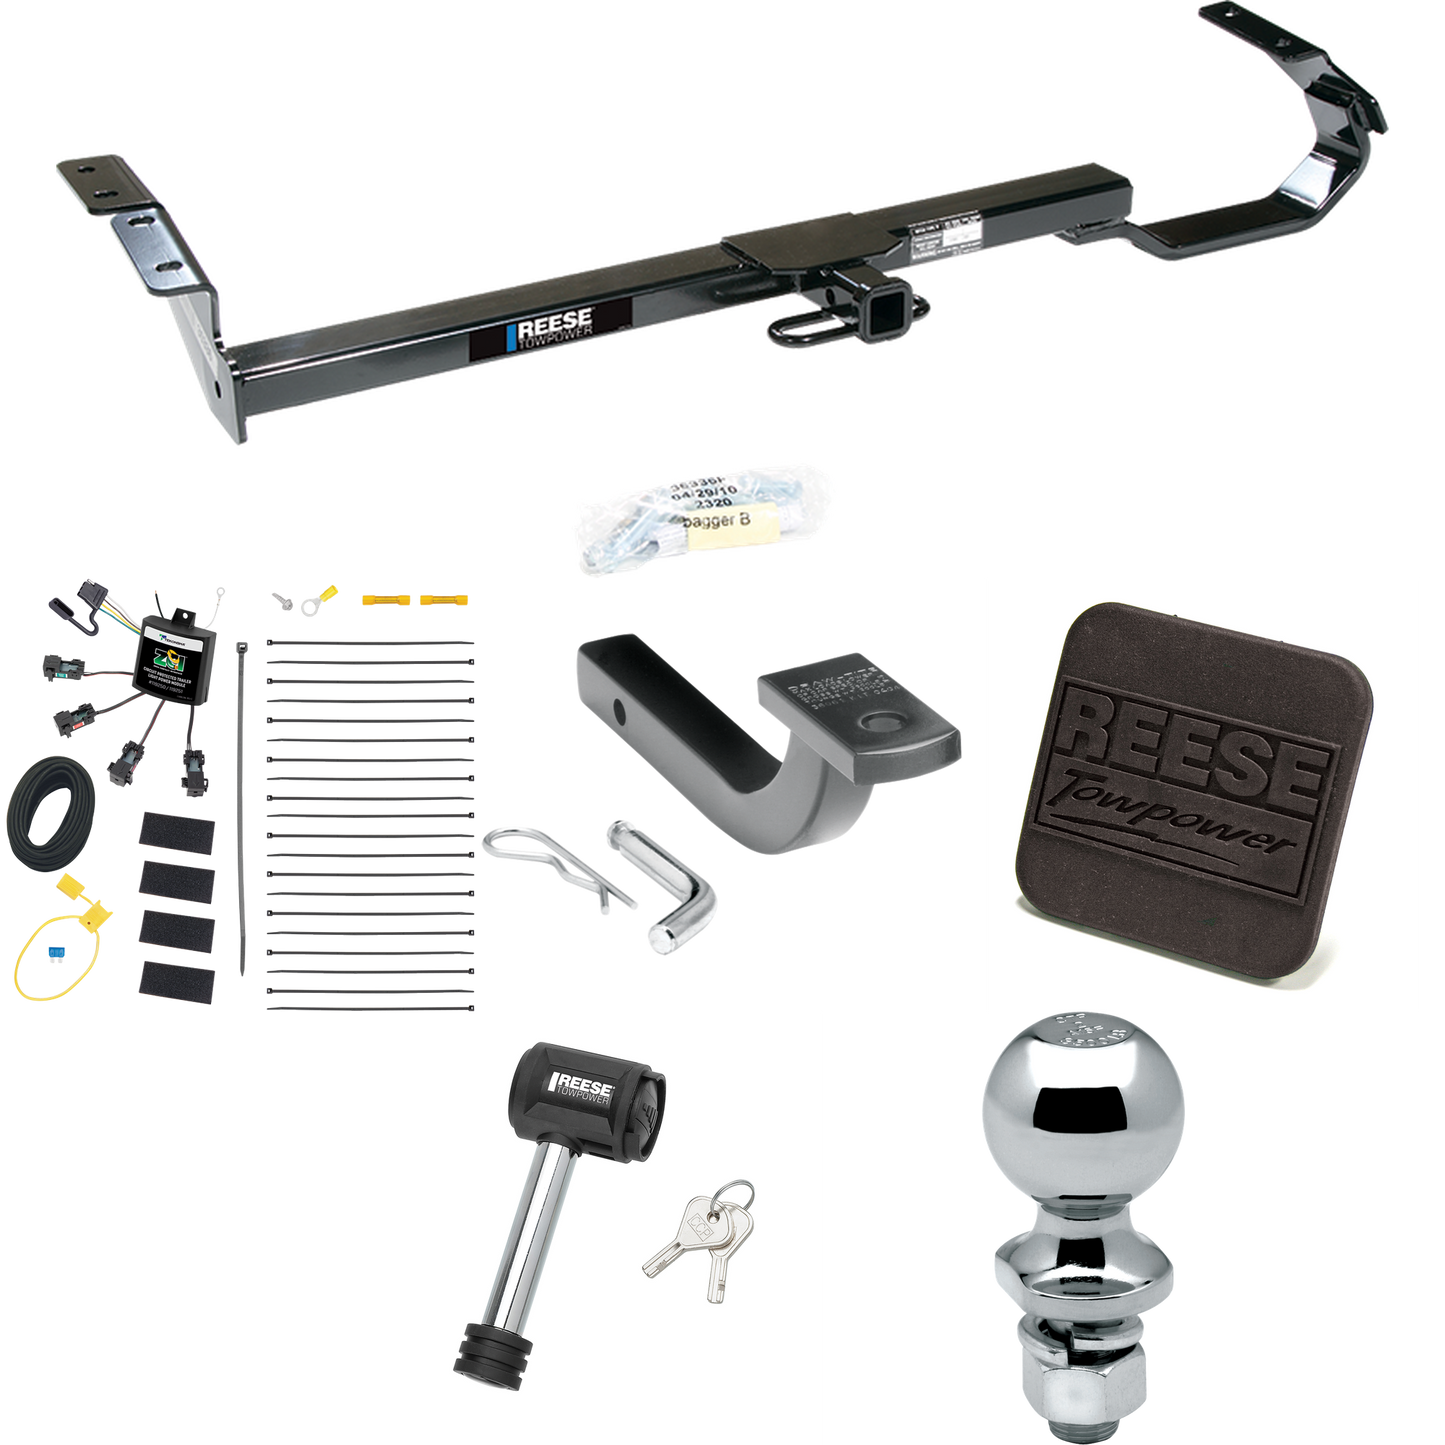 Fits 1992-1996 Toyota Camry Trailer Hitch Tow PKG w/ 4-Flat Zero Contact "No Splice" Wiring Harness + Draw-Bar + 2" Ball + Hitch Cover + Hitch Lock By Reese Towpower